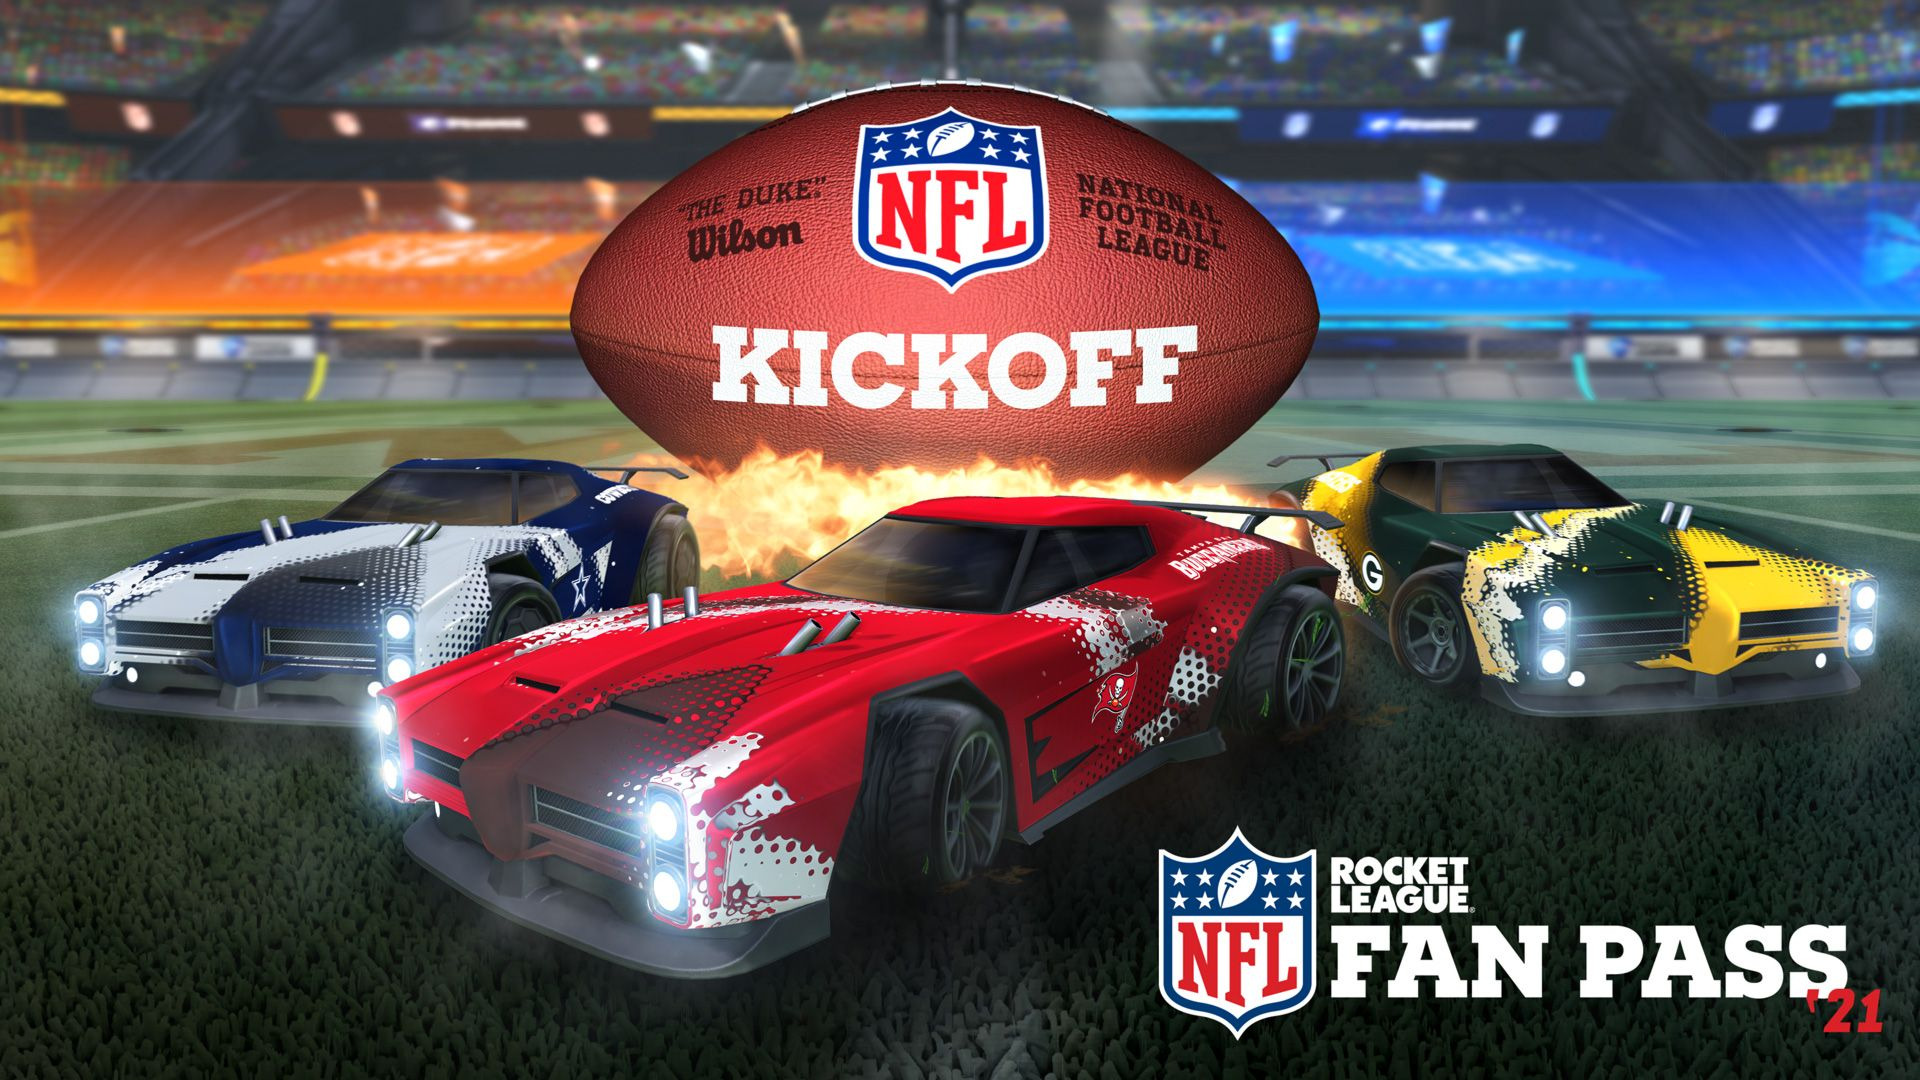 NFL Fan Pass 2021 on all platforms starting today